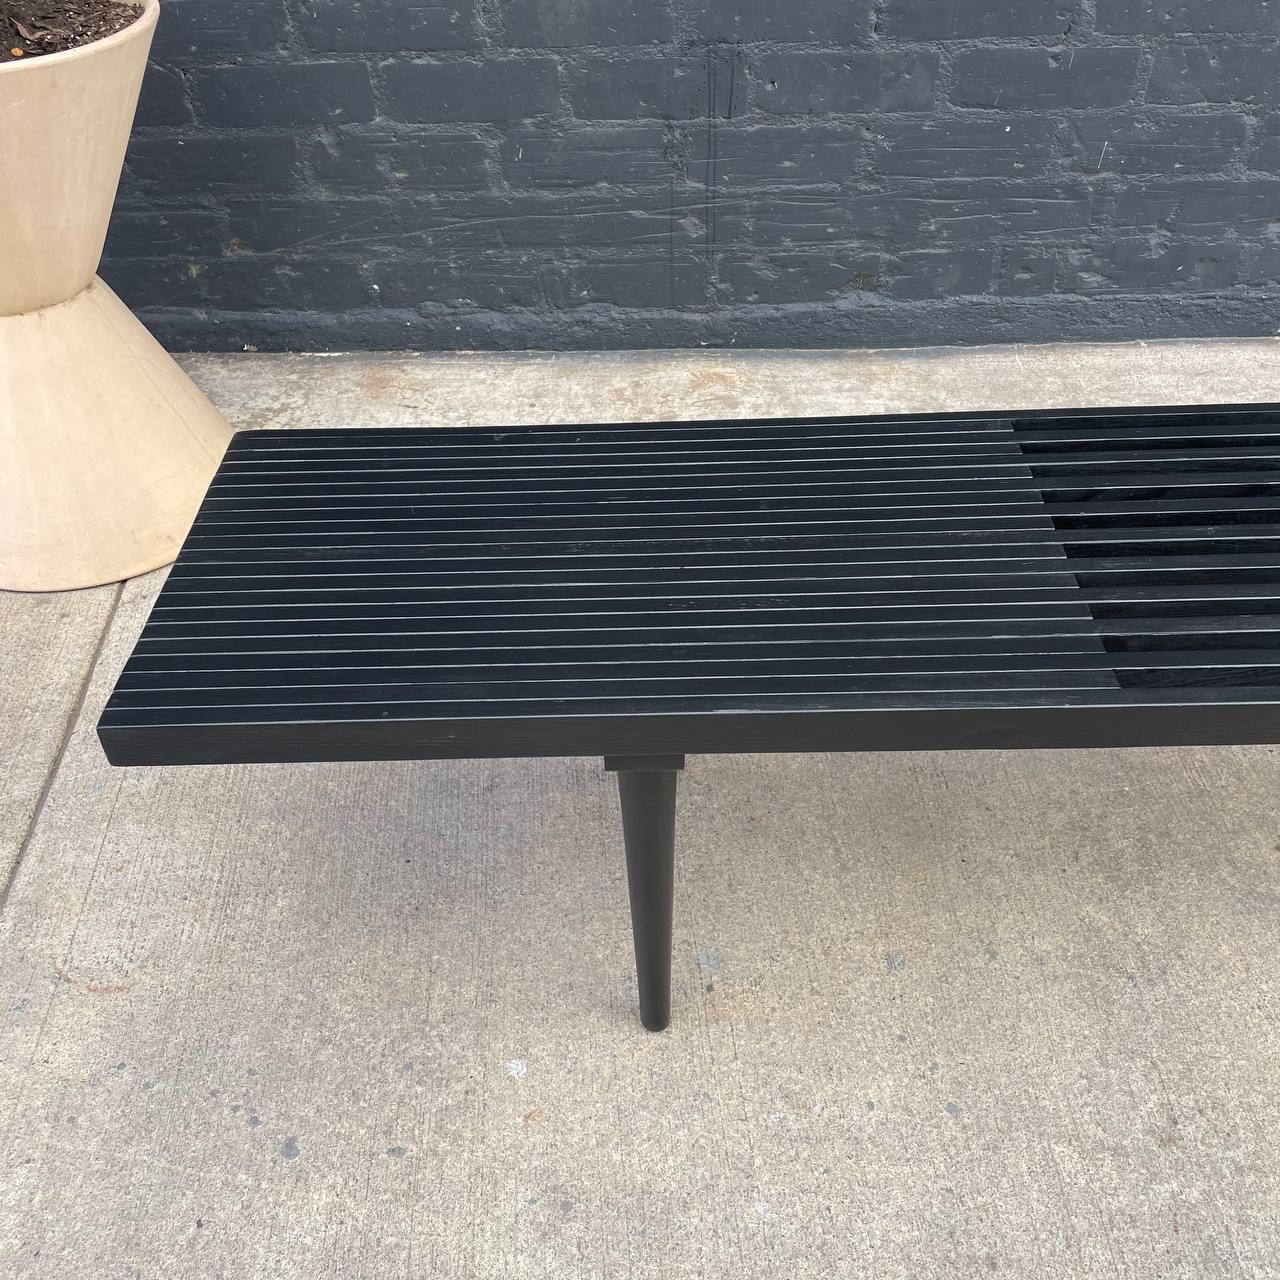 Wood Newly Refinished - Mid-Century Modern Black Slatted Bench or Coffee Table